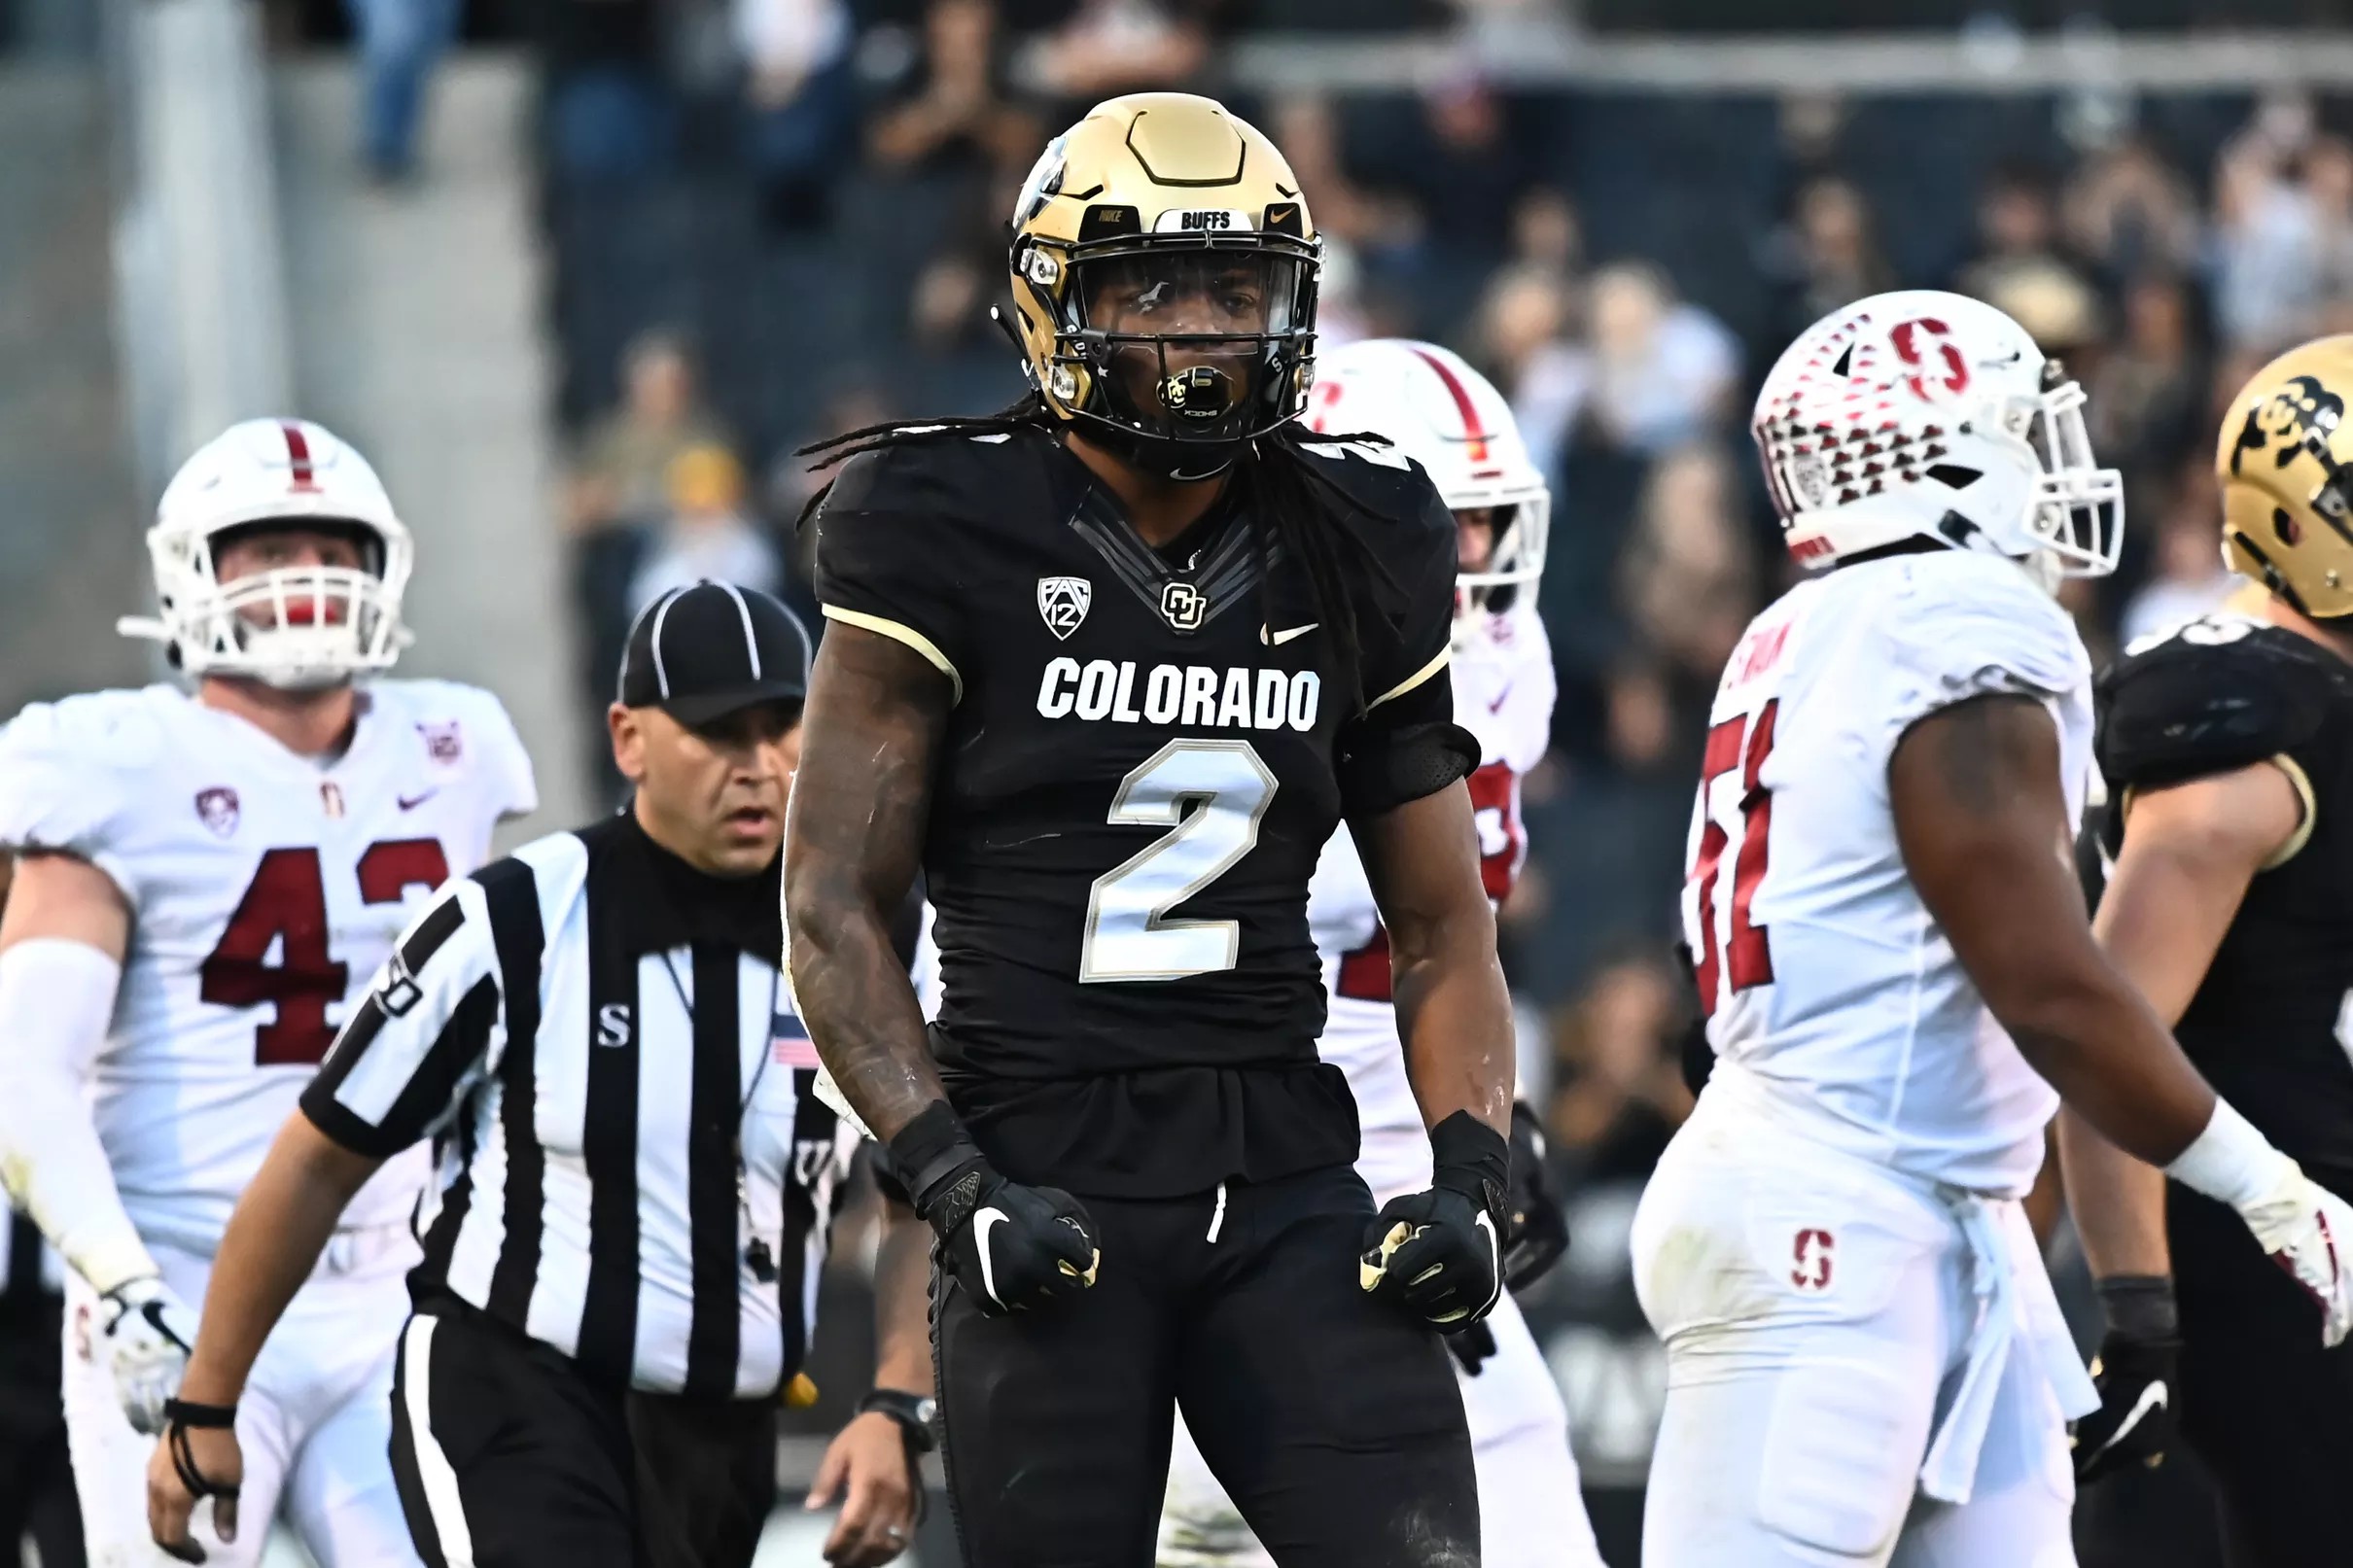 Ranking the top 5 wide receiver prospects from the 2020 NFL Draft